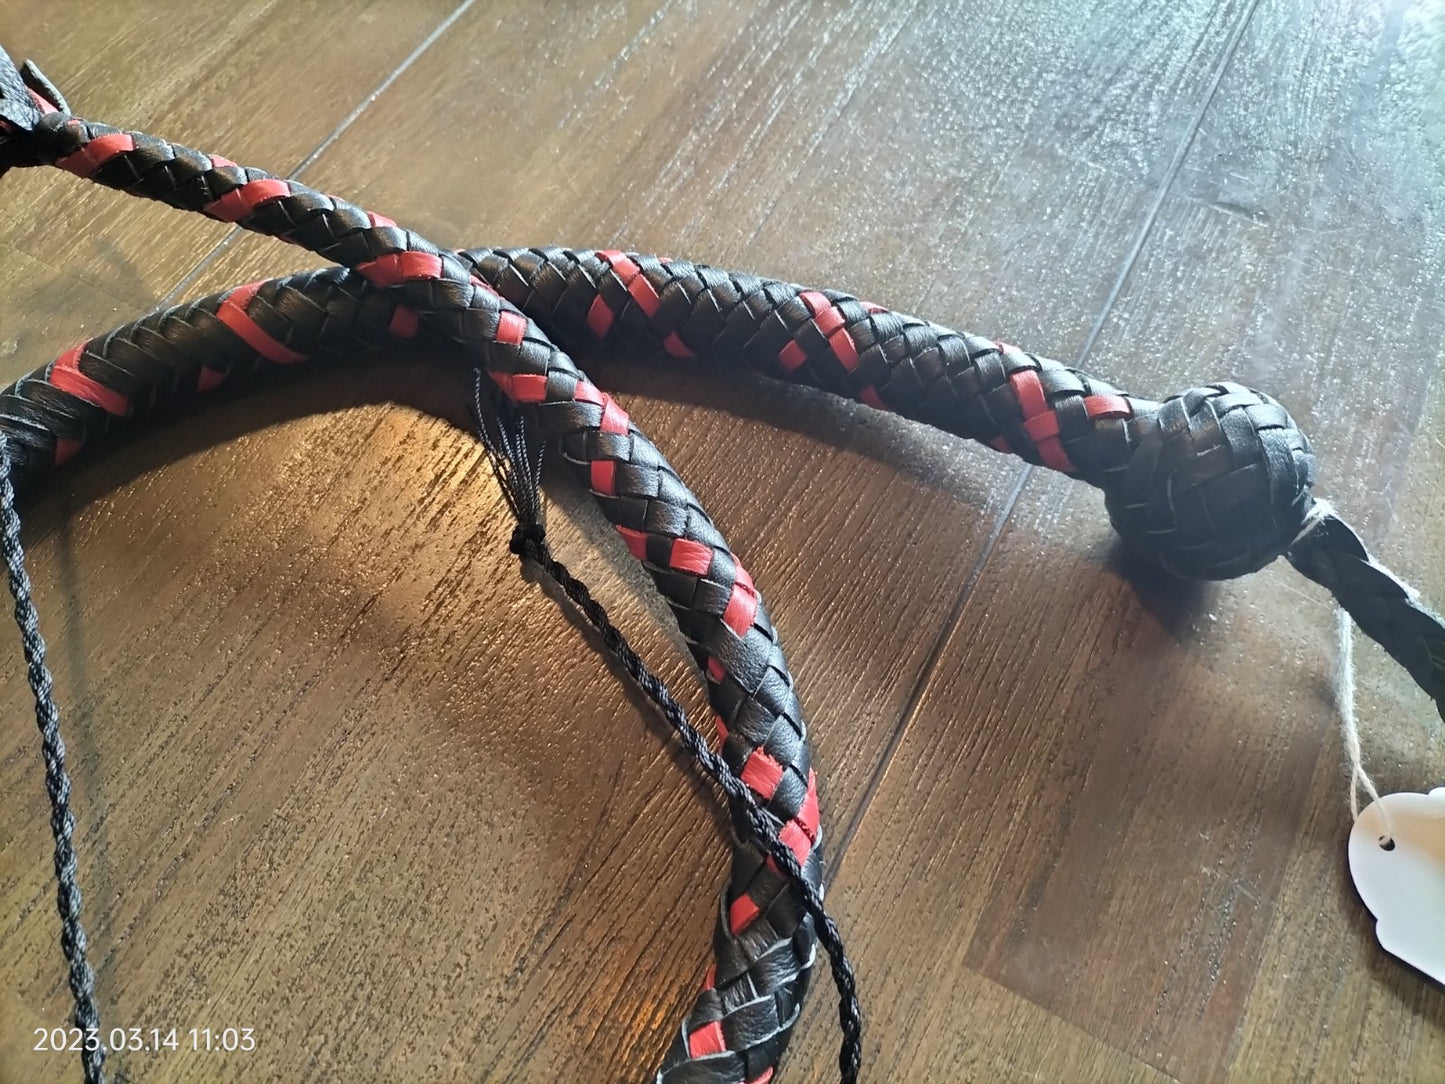 Snakewhip 3 pieds rouge/noir/blanc